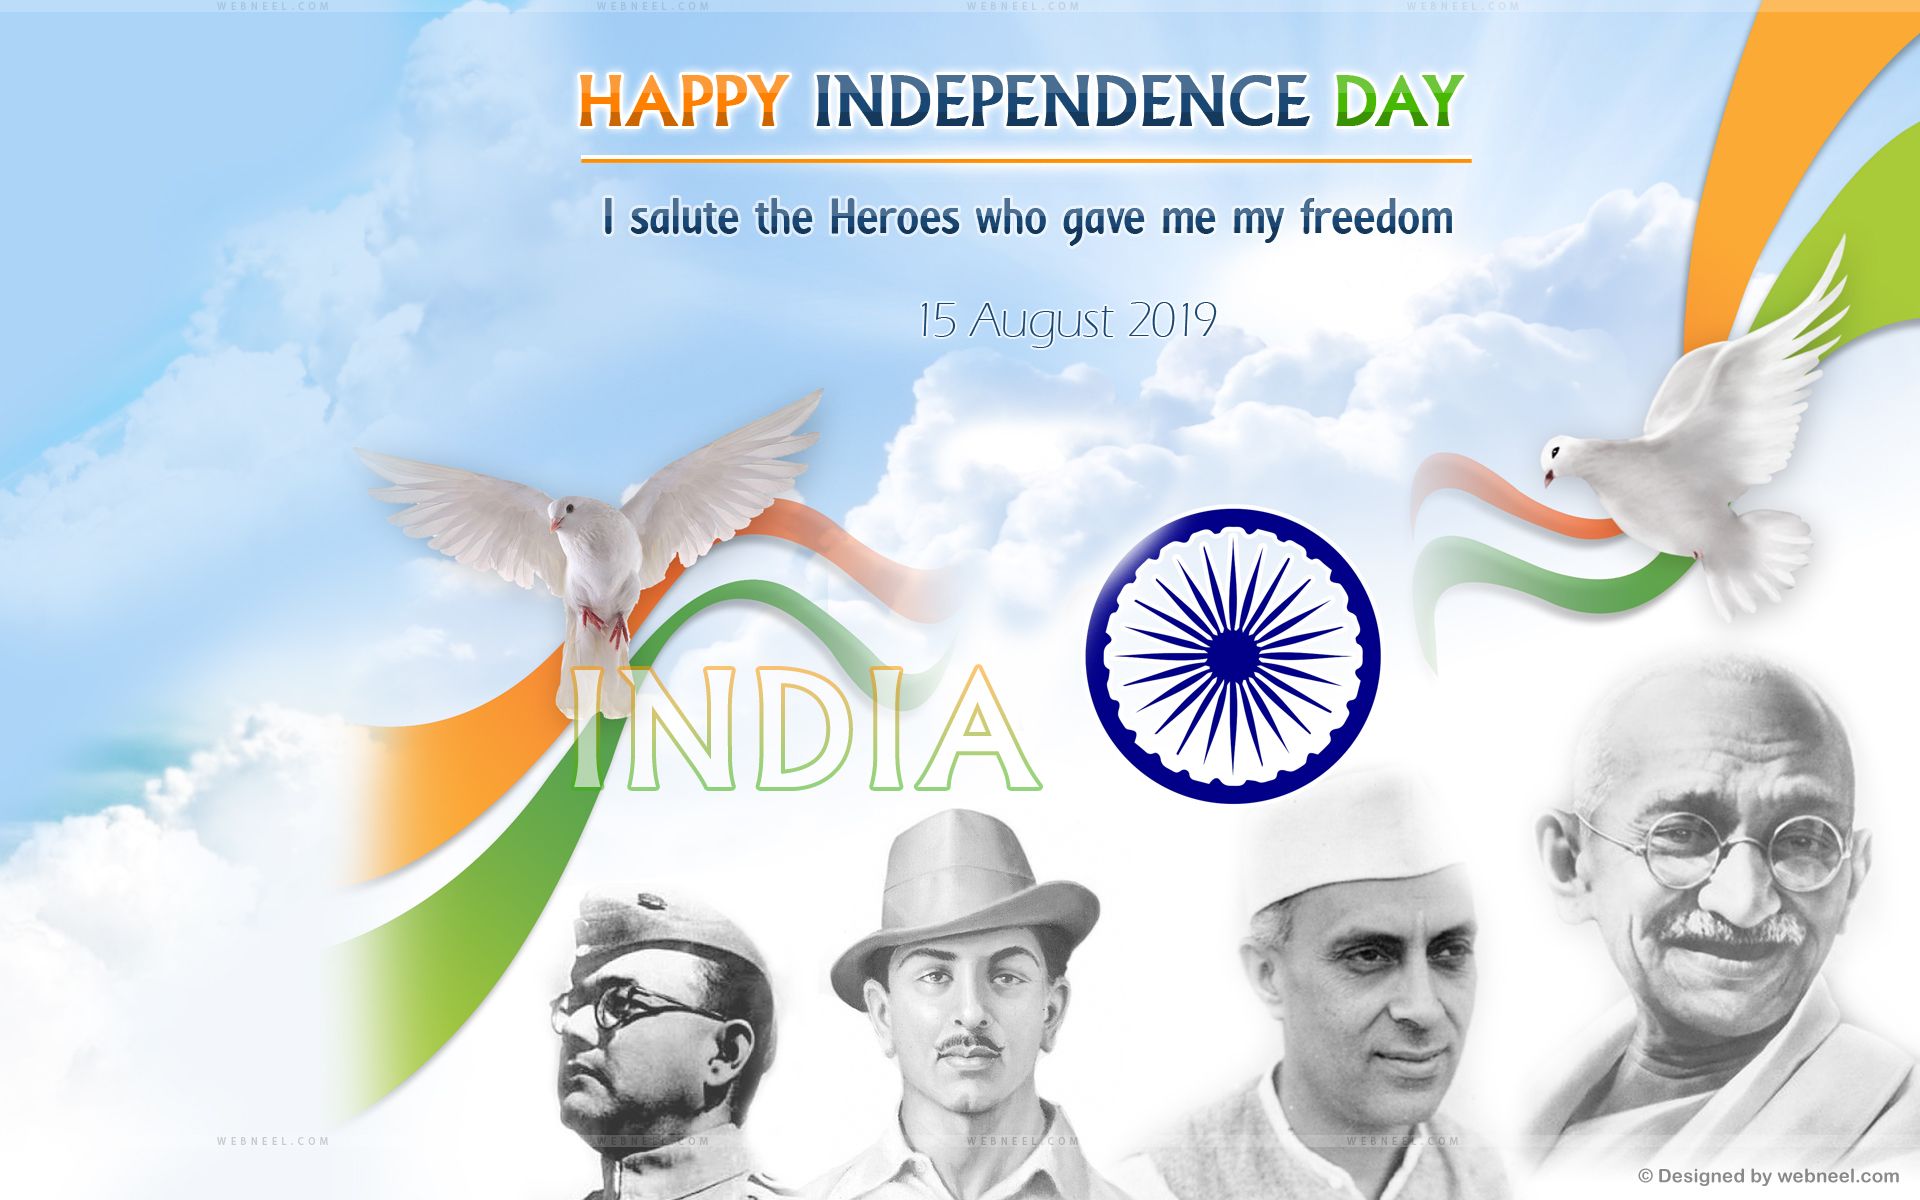 Indian Freedom Fighters Wallpapers - Wallpaper Cave